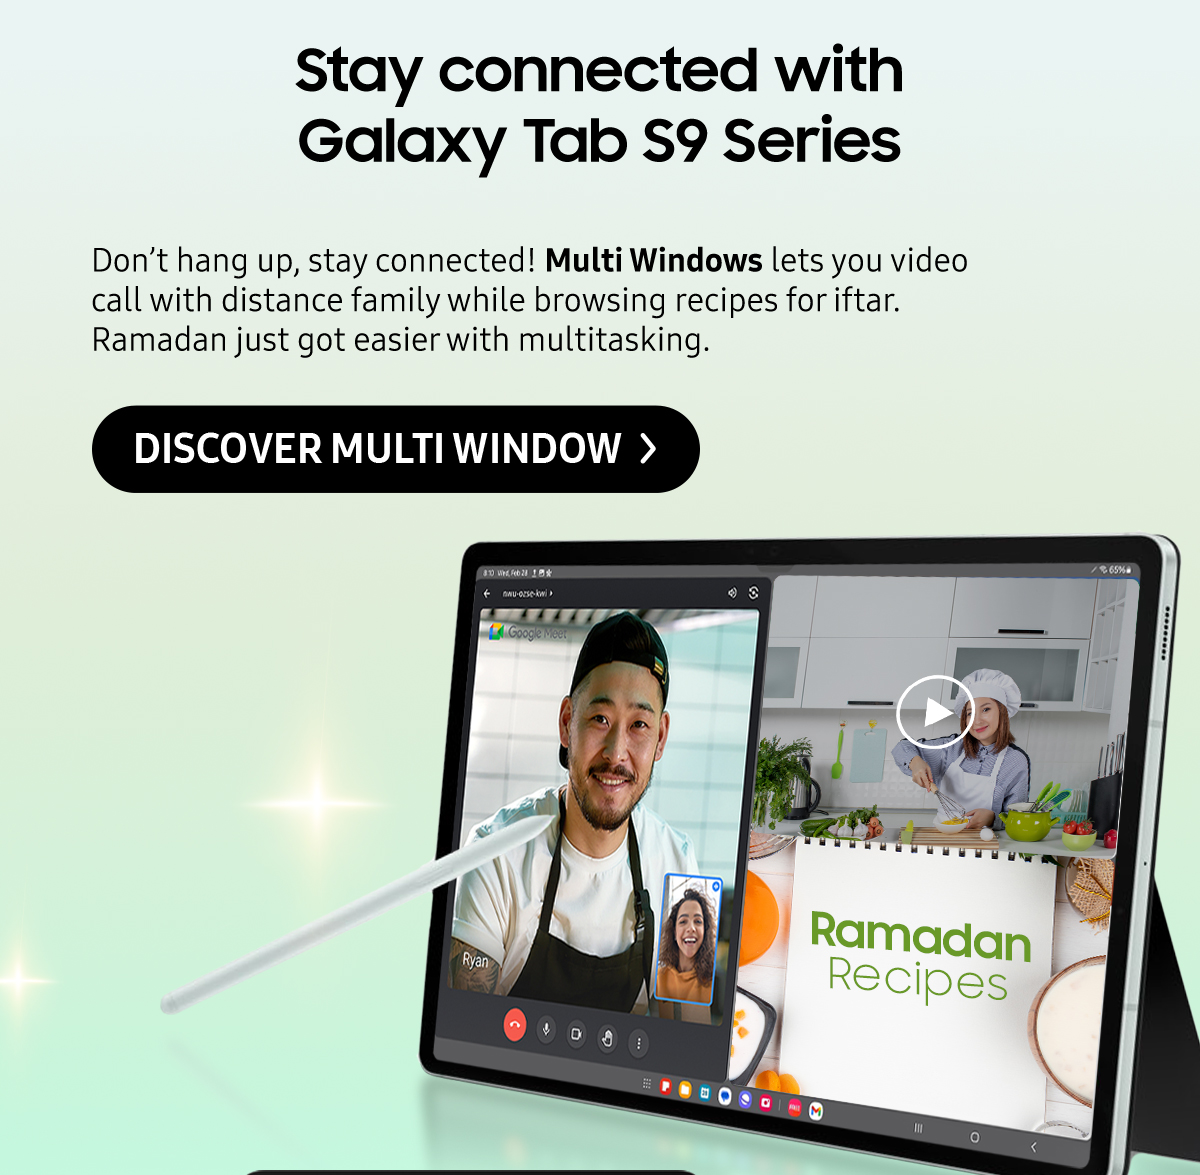 Stay connected with Galaxy Tab S9 Series | Don't hang up, stay connected! Multi Windows lets you video call with distance family while browsing recipes for iftar. Ramadan just got easier with multitasking.